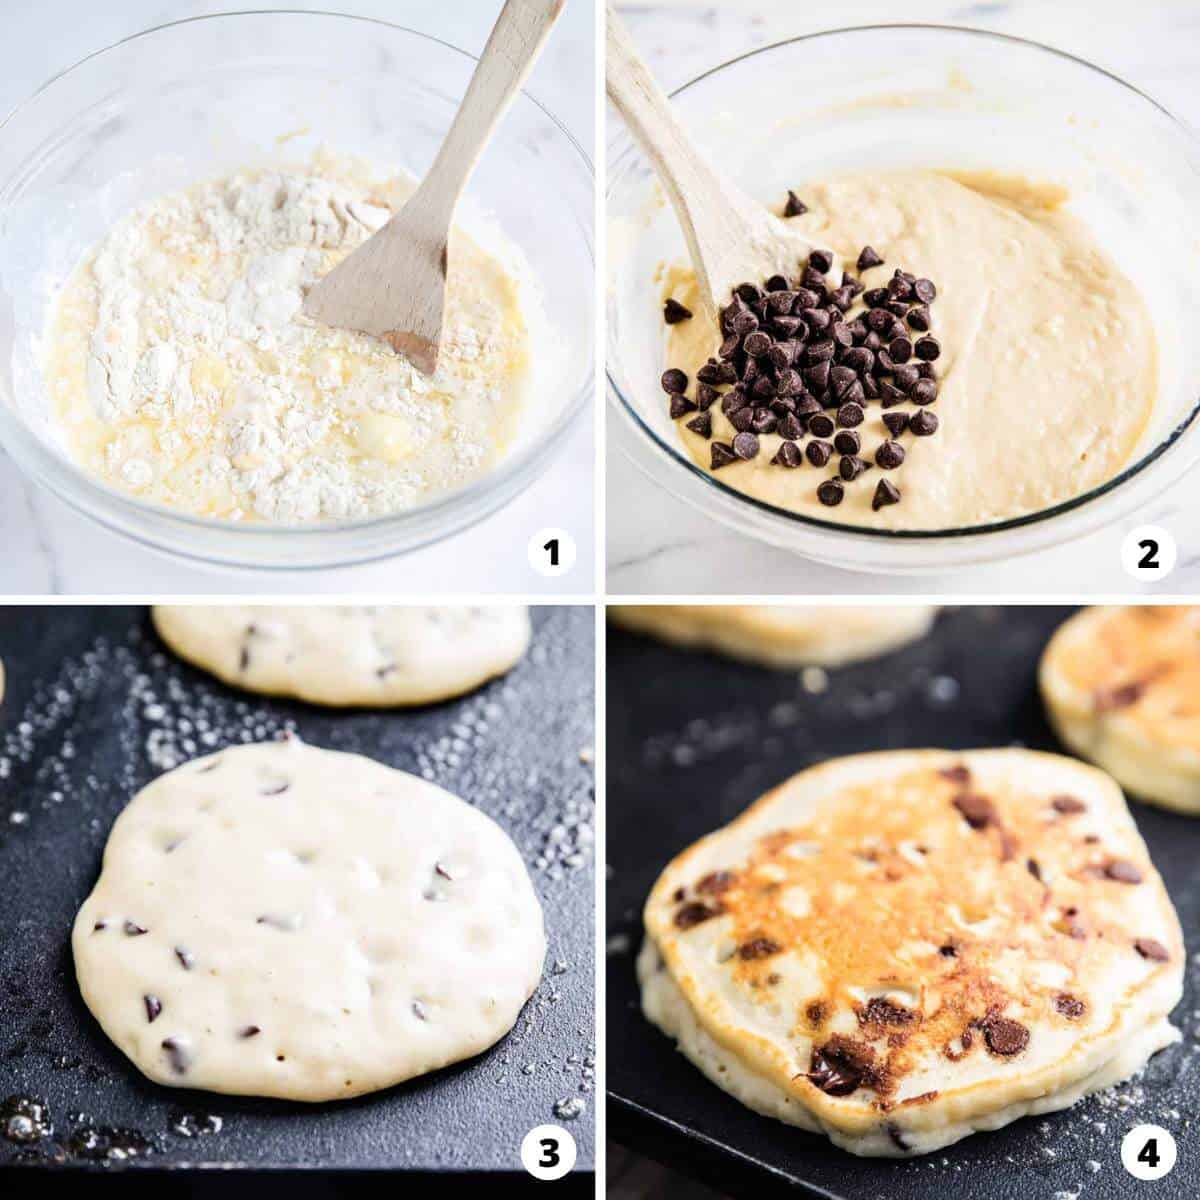 Showing how to make chocolate chip pancakes in a 4 step collage.